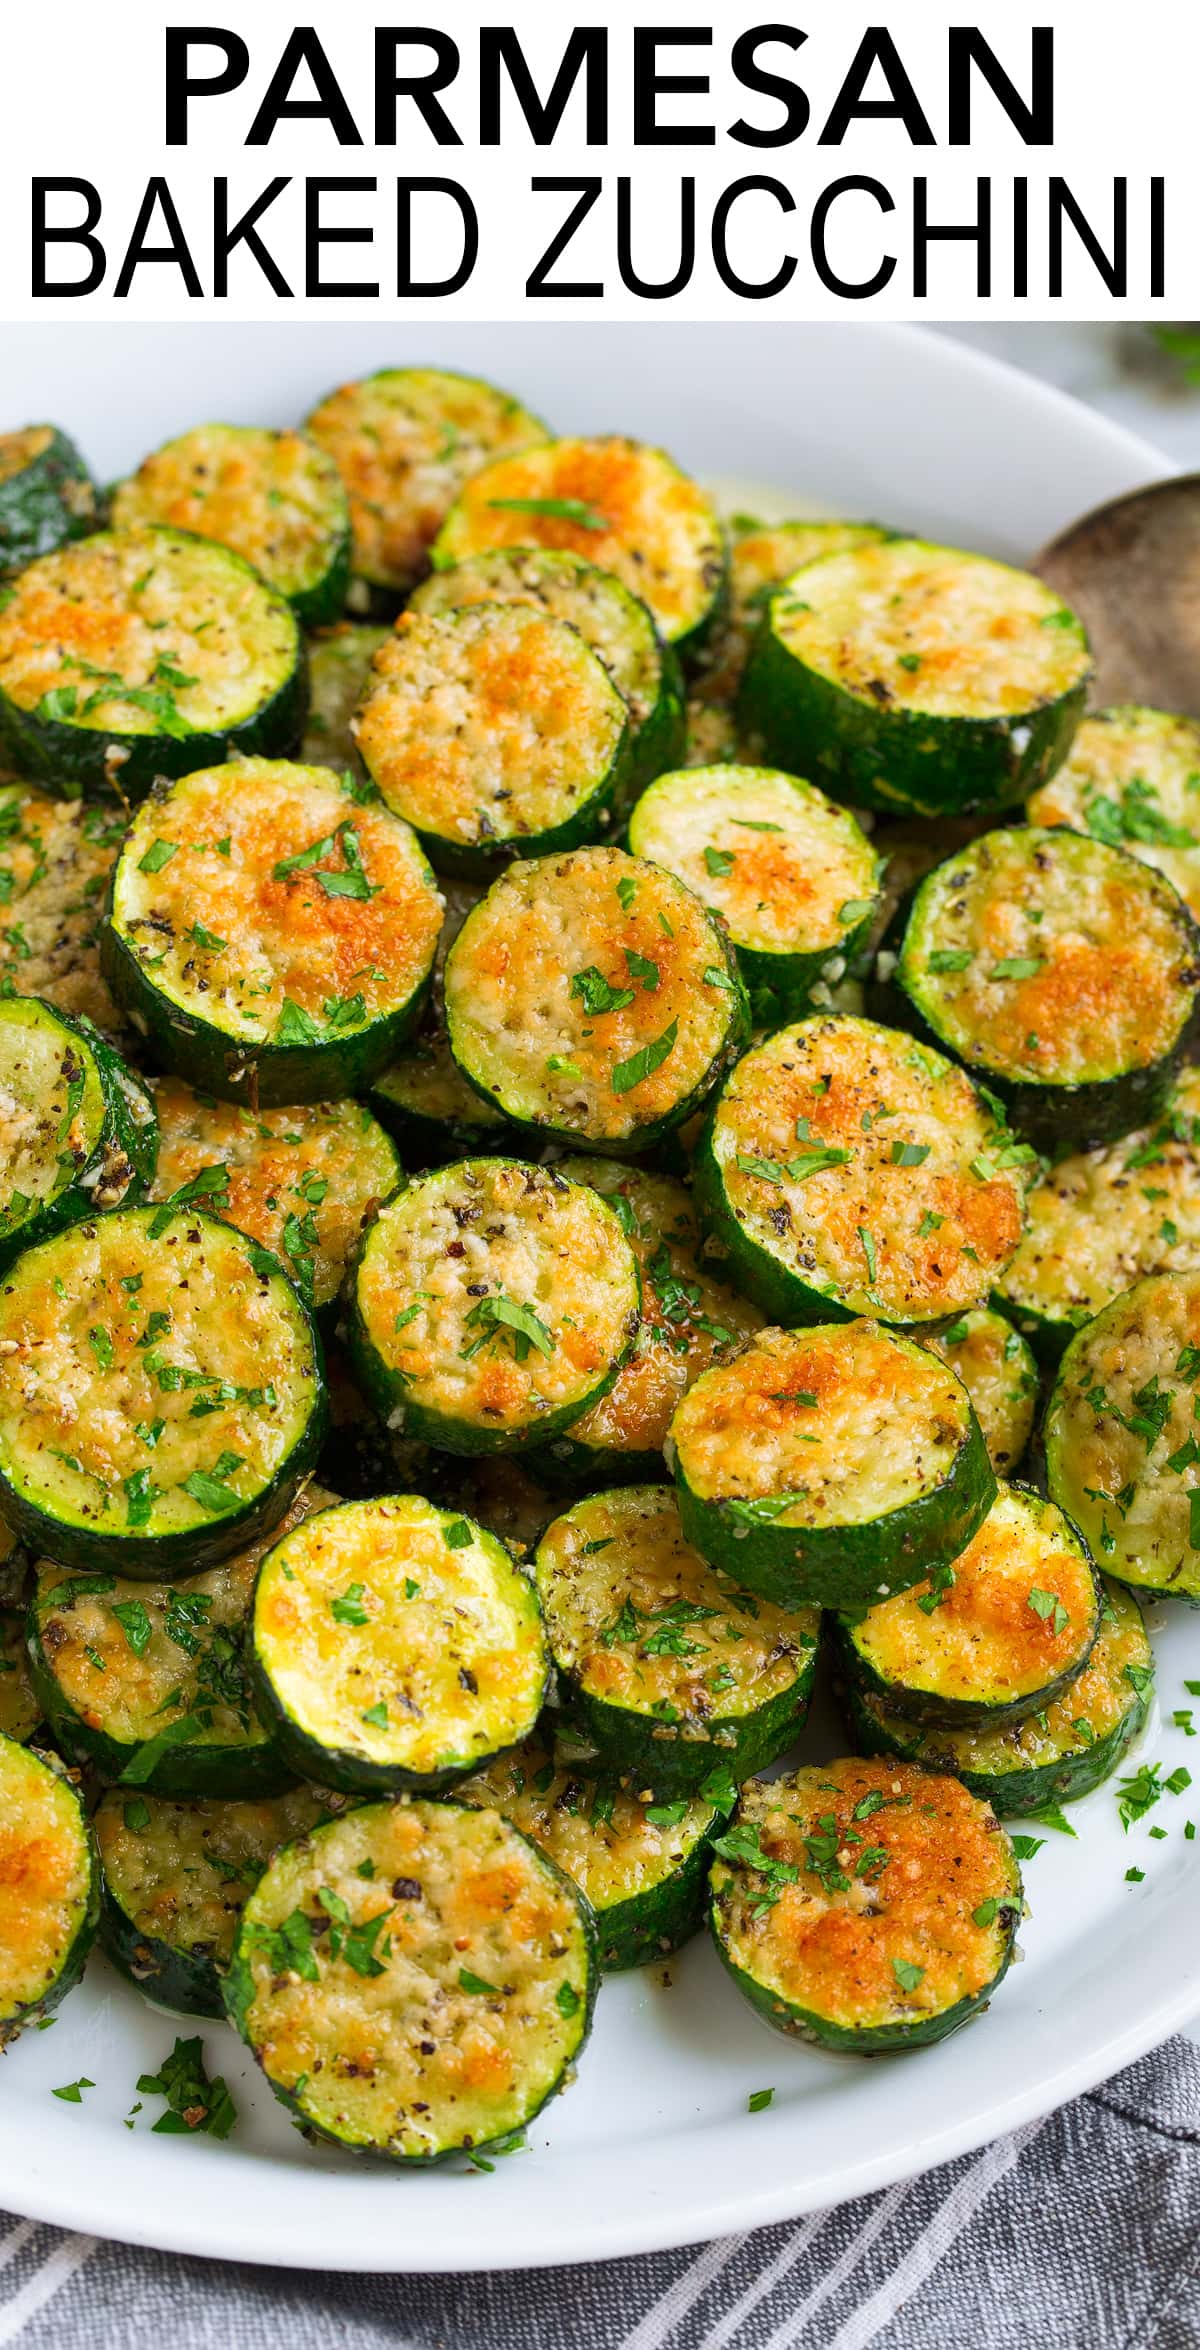 Baked Zucchini - Cooking Classy